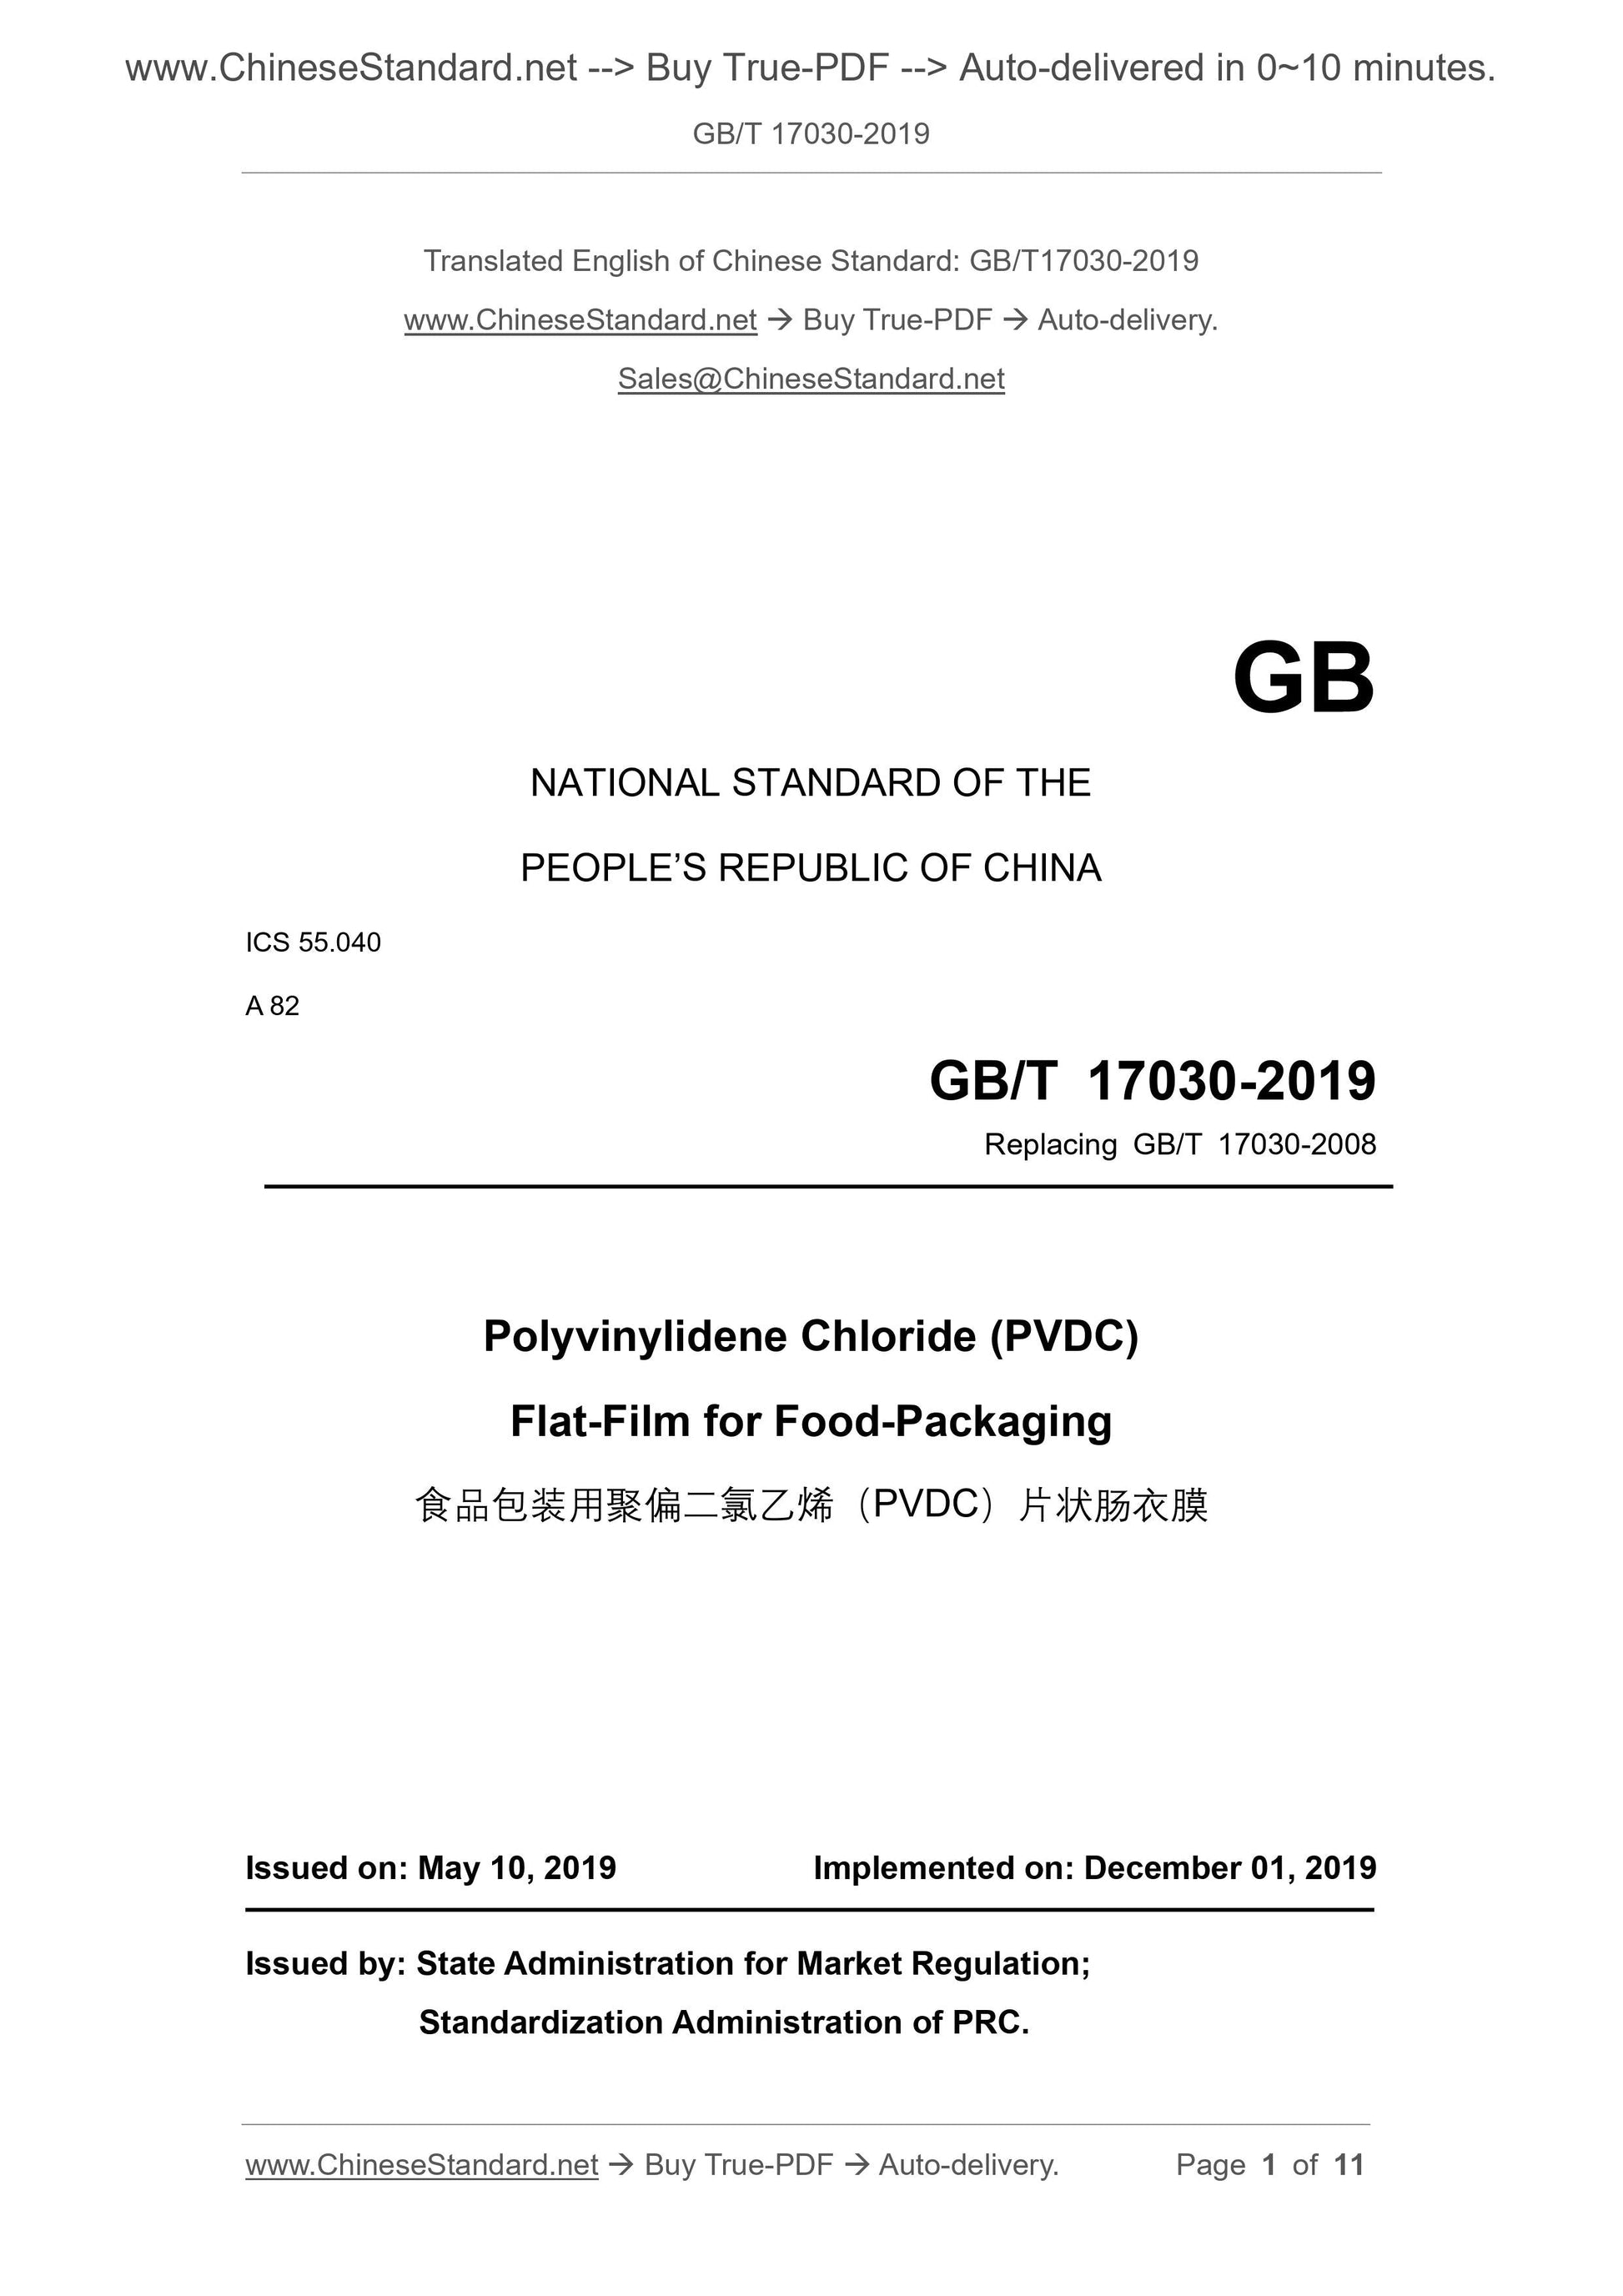 GB/T 17030-2019 Page 1